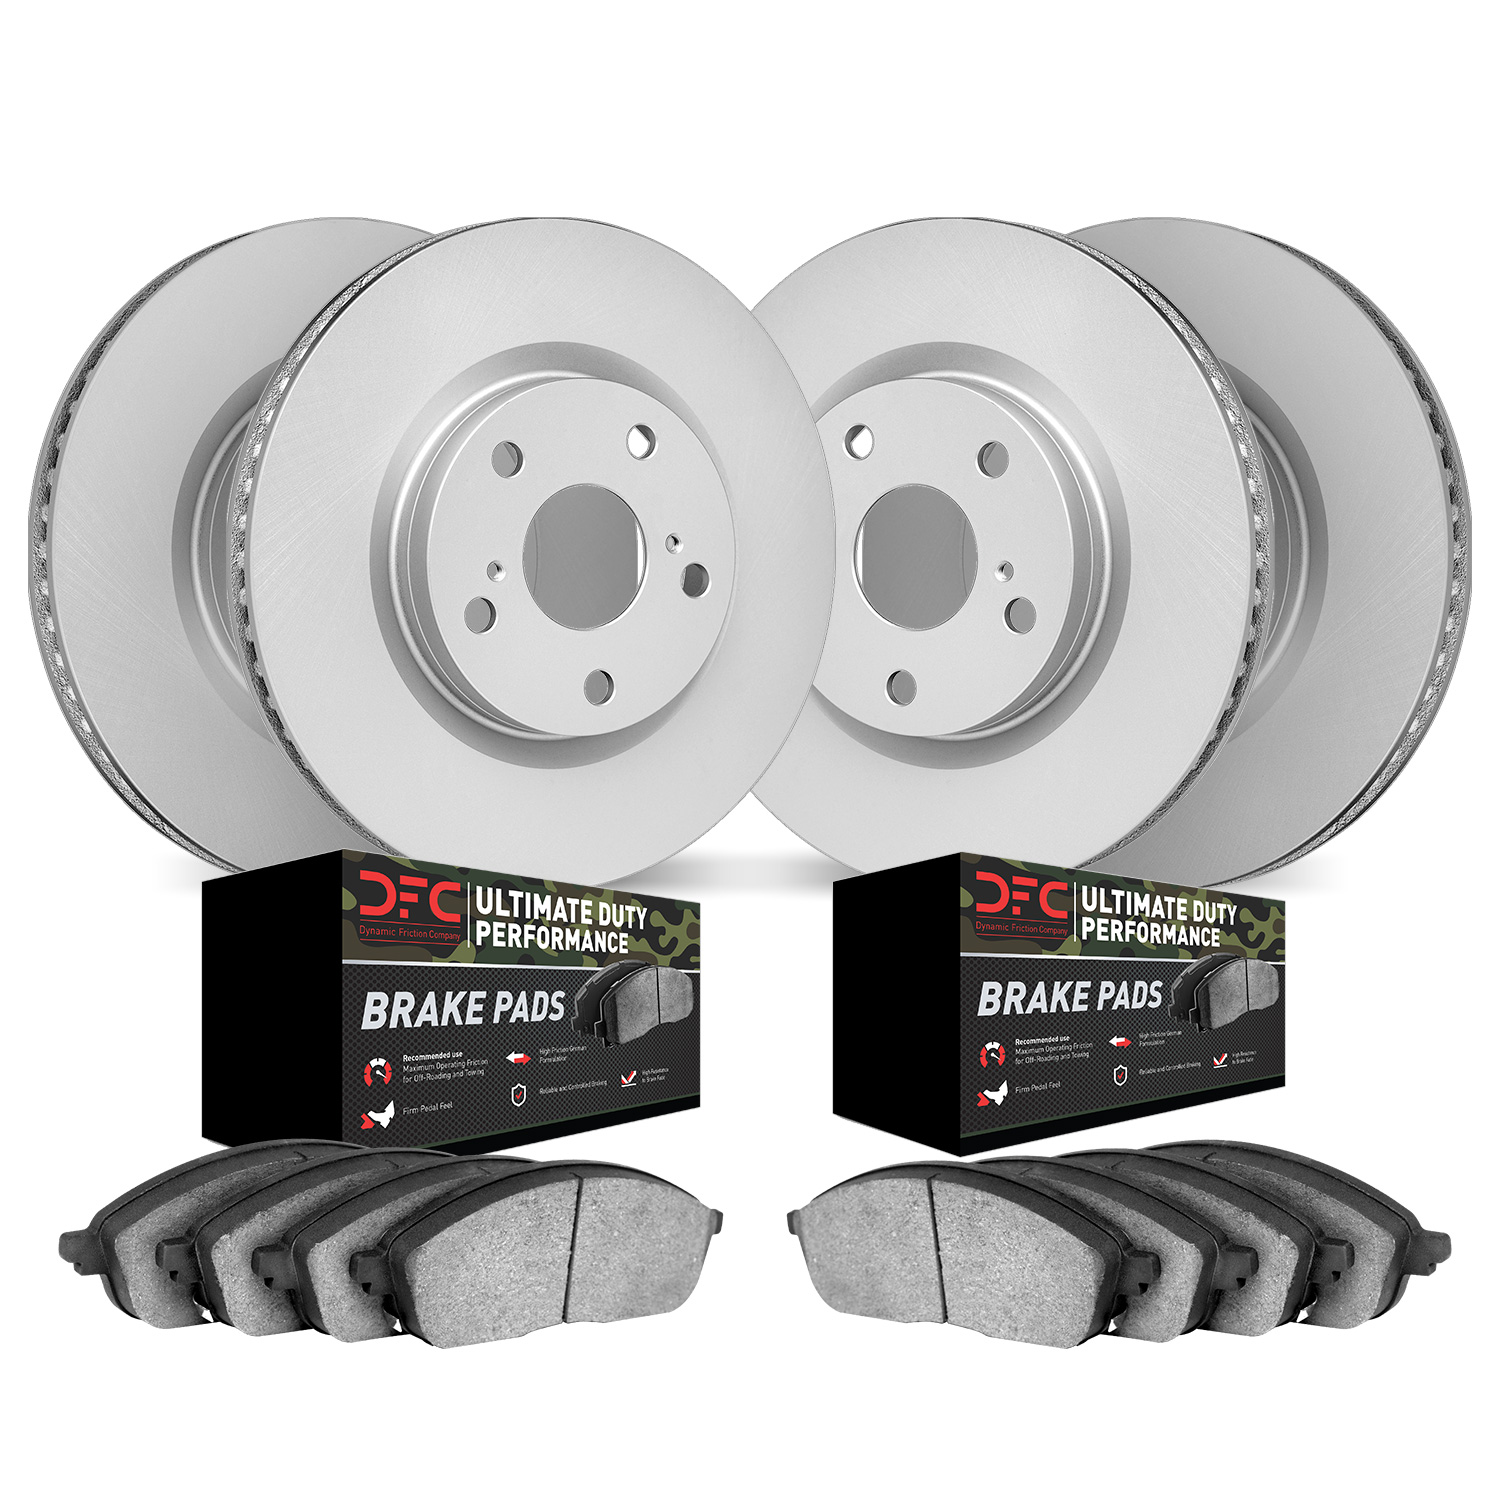 4404-48001 Geospec Brake Rotors with Ultimate-Duty Brake Pads Kit, 1997-2005 GM, Position: Front and Rear